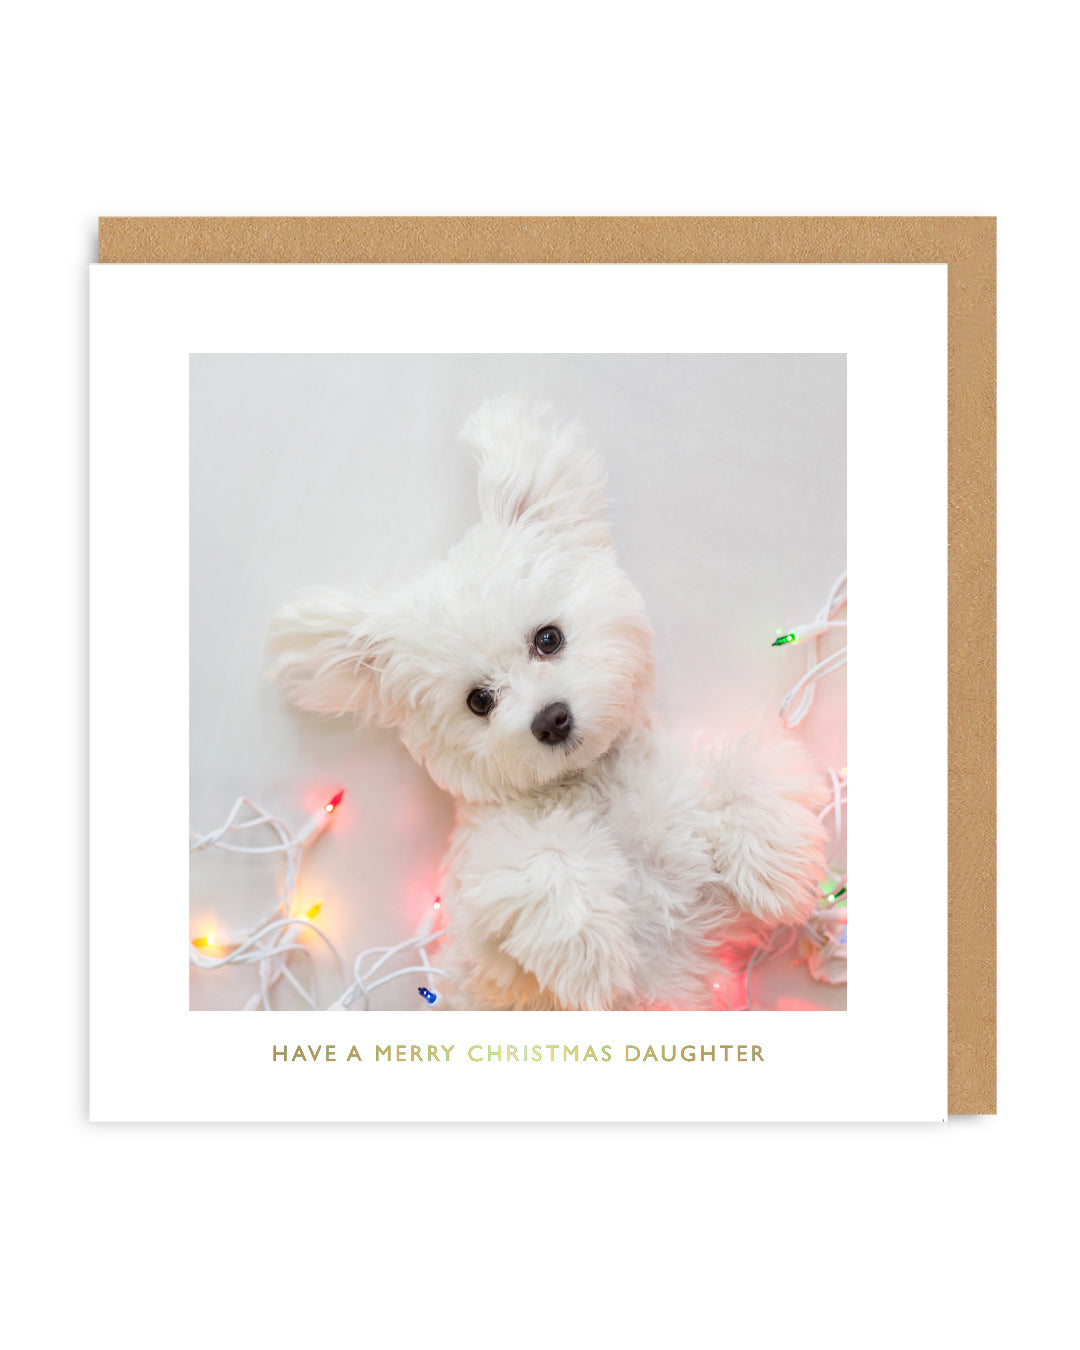 Merry Christmas Daughter Cute Puppy Christmas Card